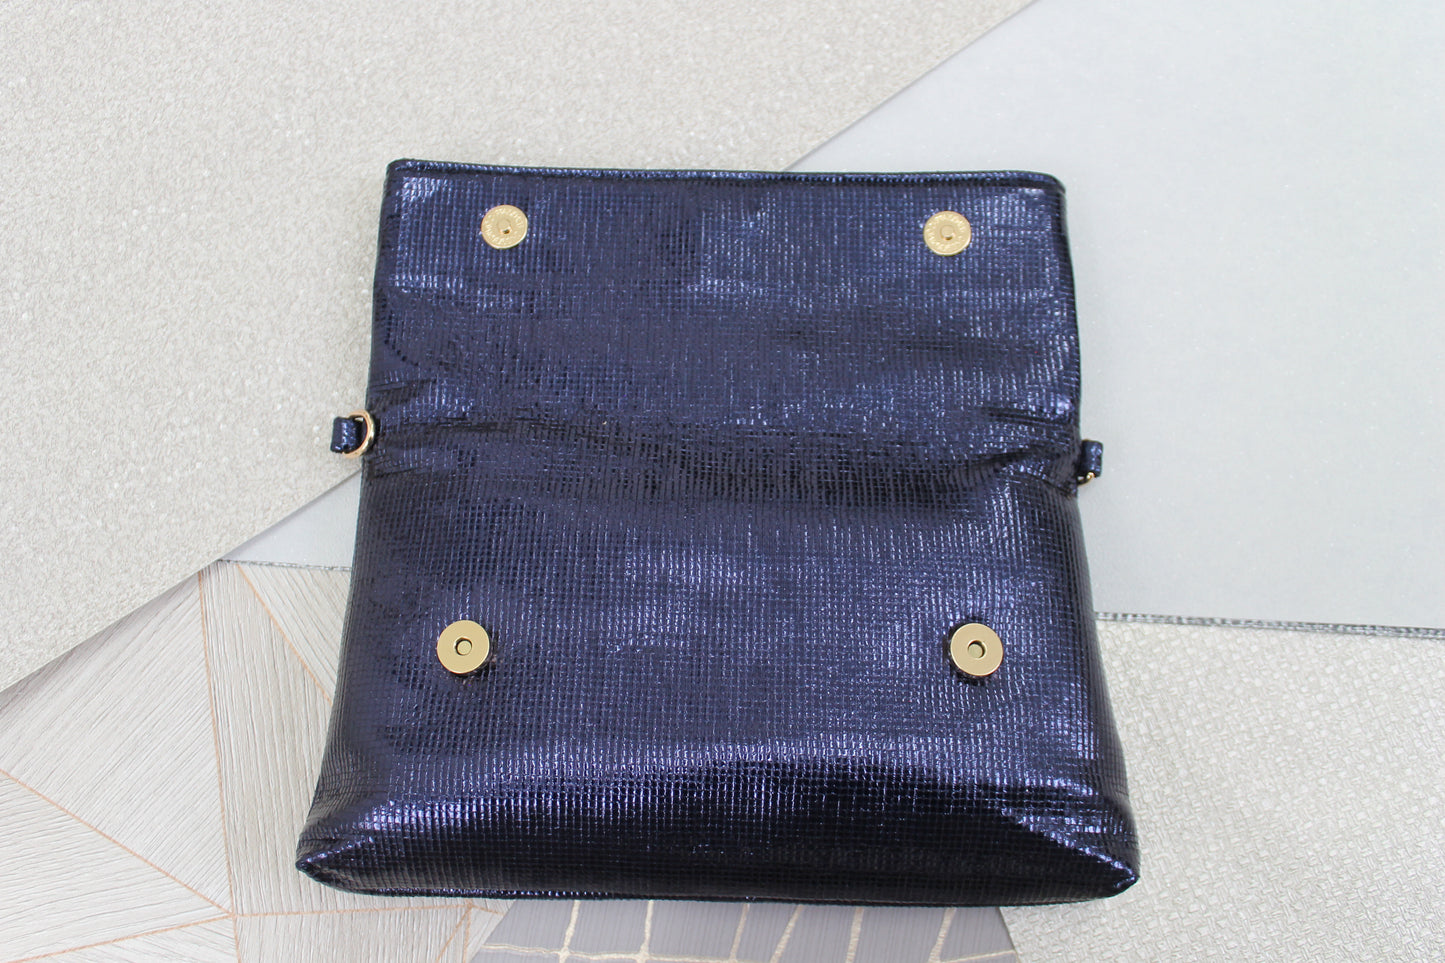 Tess Glamour Party Clutch Bag Navy Blue